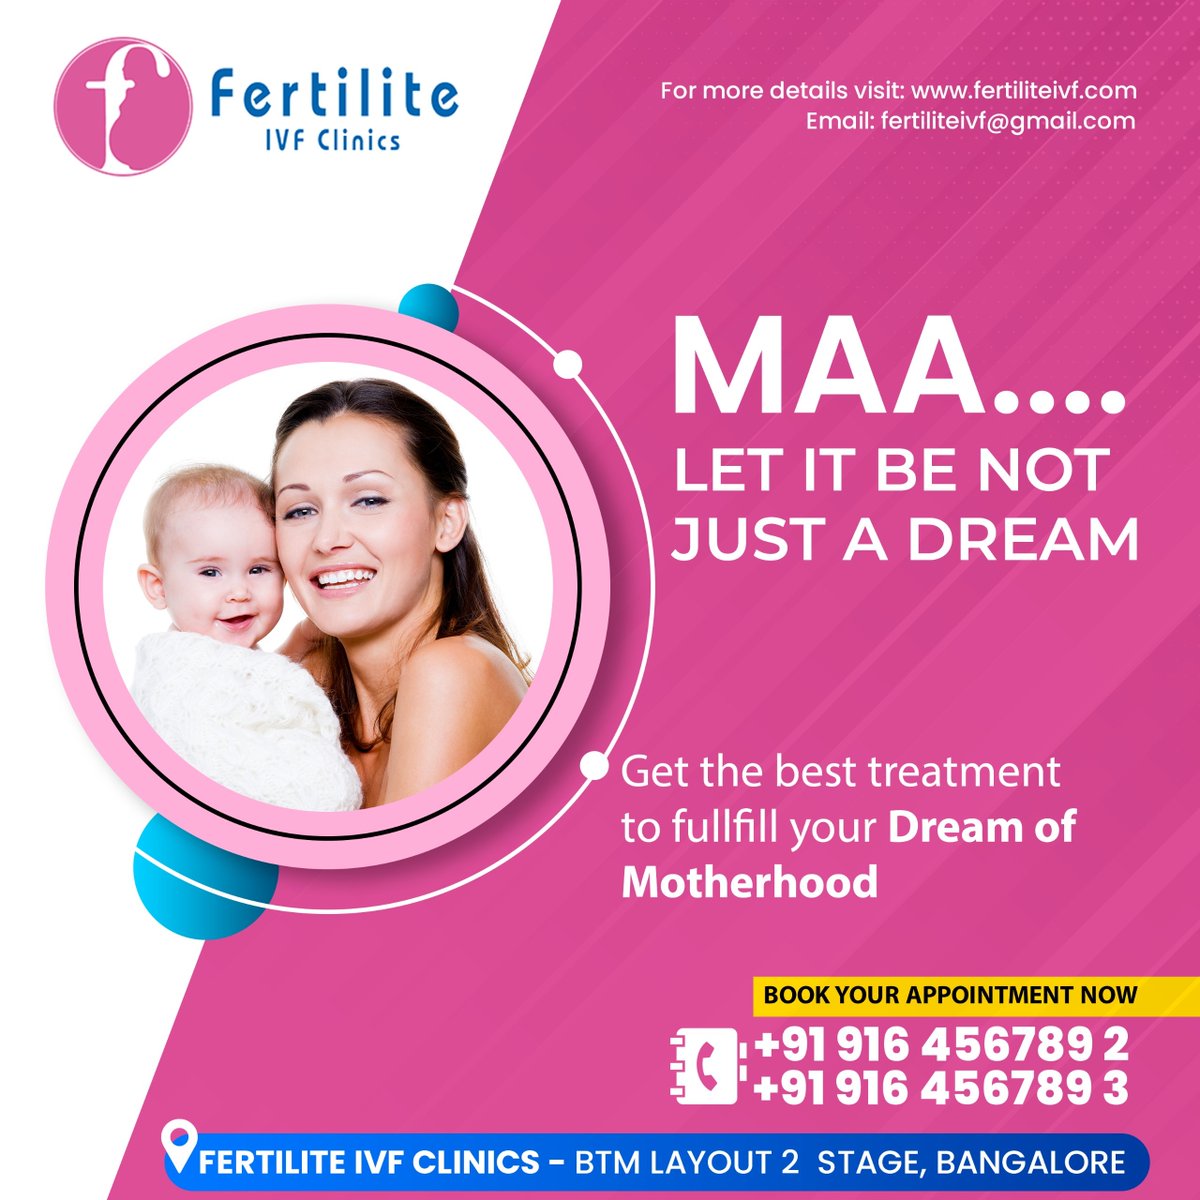 🌟 Ready to make your dream of motherhood a reality? Look no further than Fertilite IVF Clinics! 🌟

👶 Book your appointment now! Call us at +91 9164567892 or +91 9164567893.

Visit our website for more details: fertiliteivf.com

#FertiliteIVF #IVFclinics #Infertility🌱💕